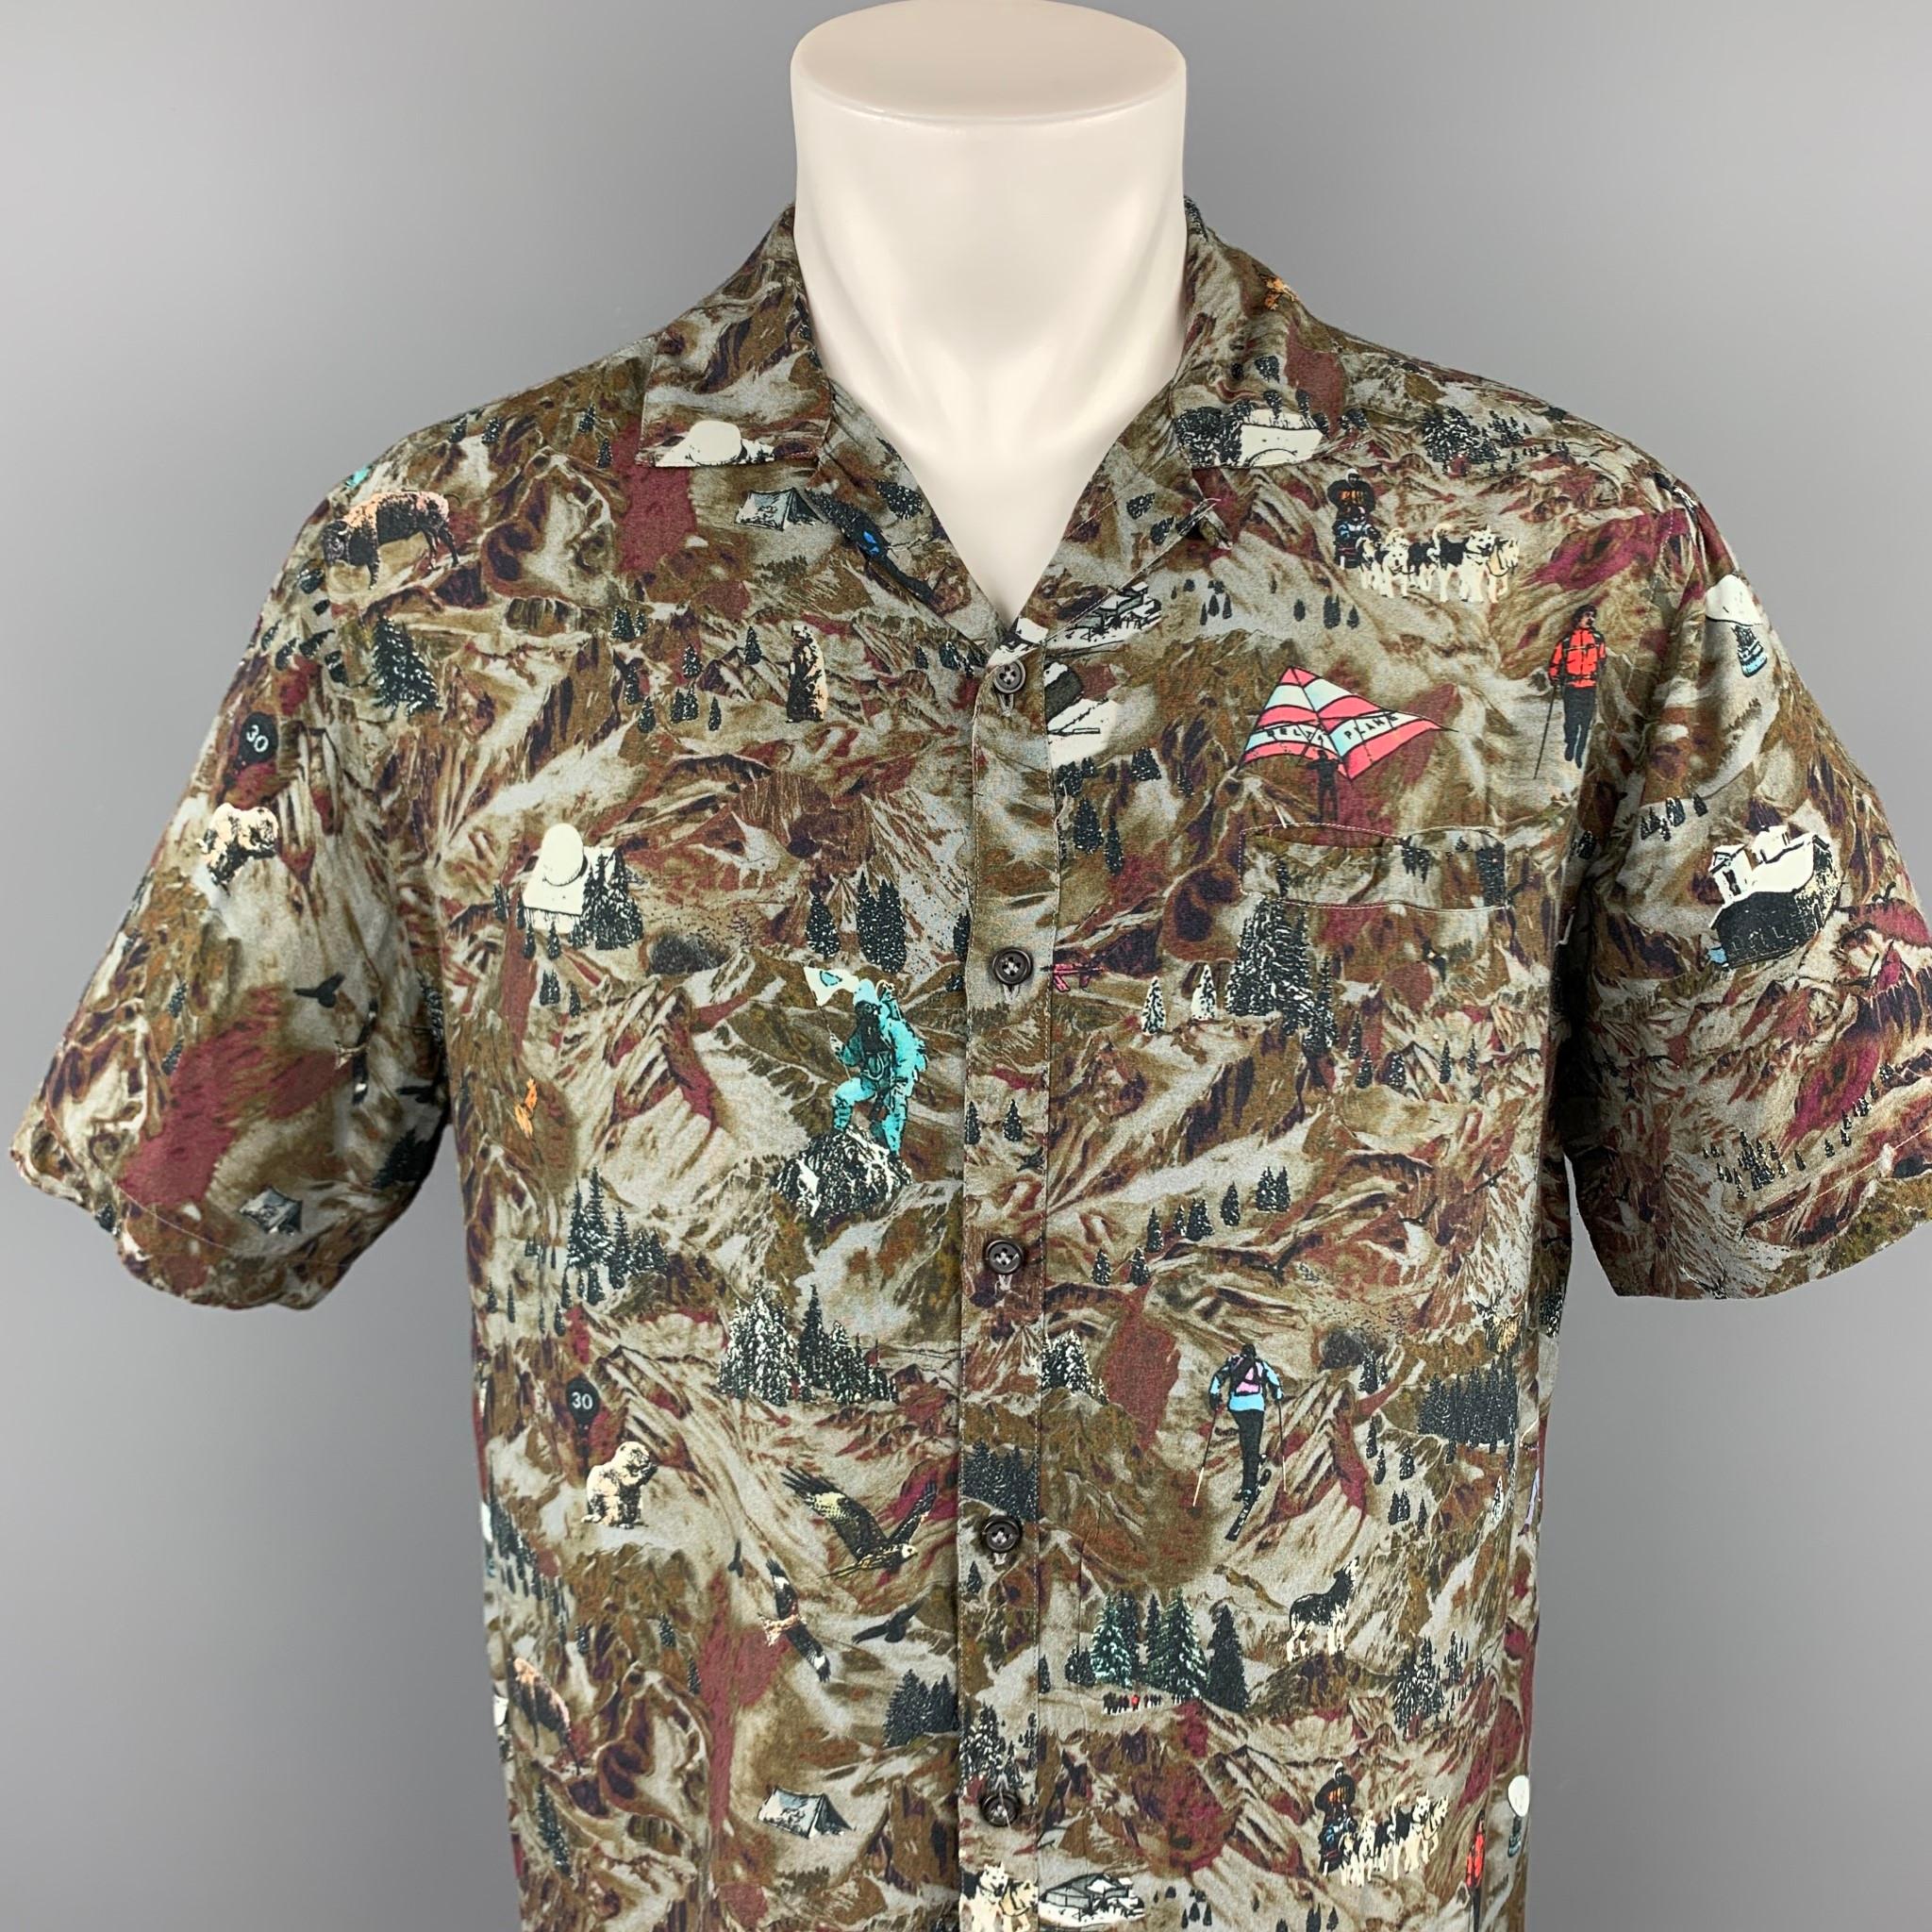 LANVIN camp short sleeve shirt comes in a grey & brown print viscose featuring a button up style, spread collar, and a front slit pocket pocket. Made in Italy.

Very Good Pre-Owned Condition.
Marked: 41/46

Measurements:

Shoulder: 19 in. 
Chest: 46